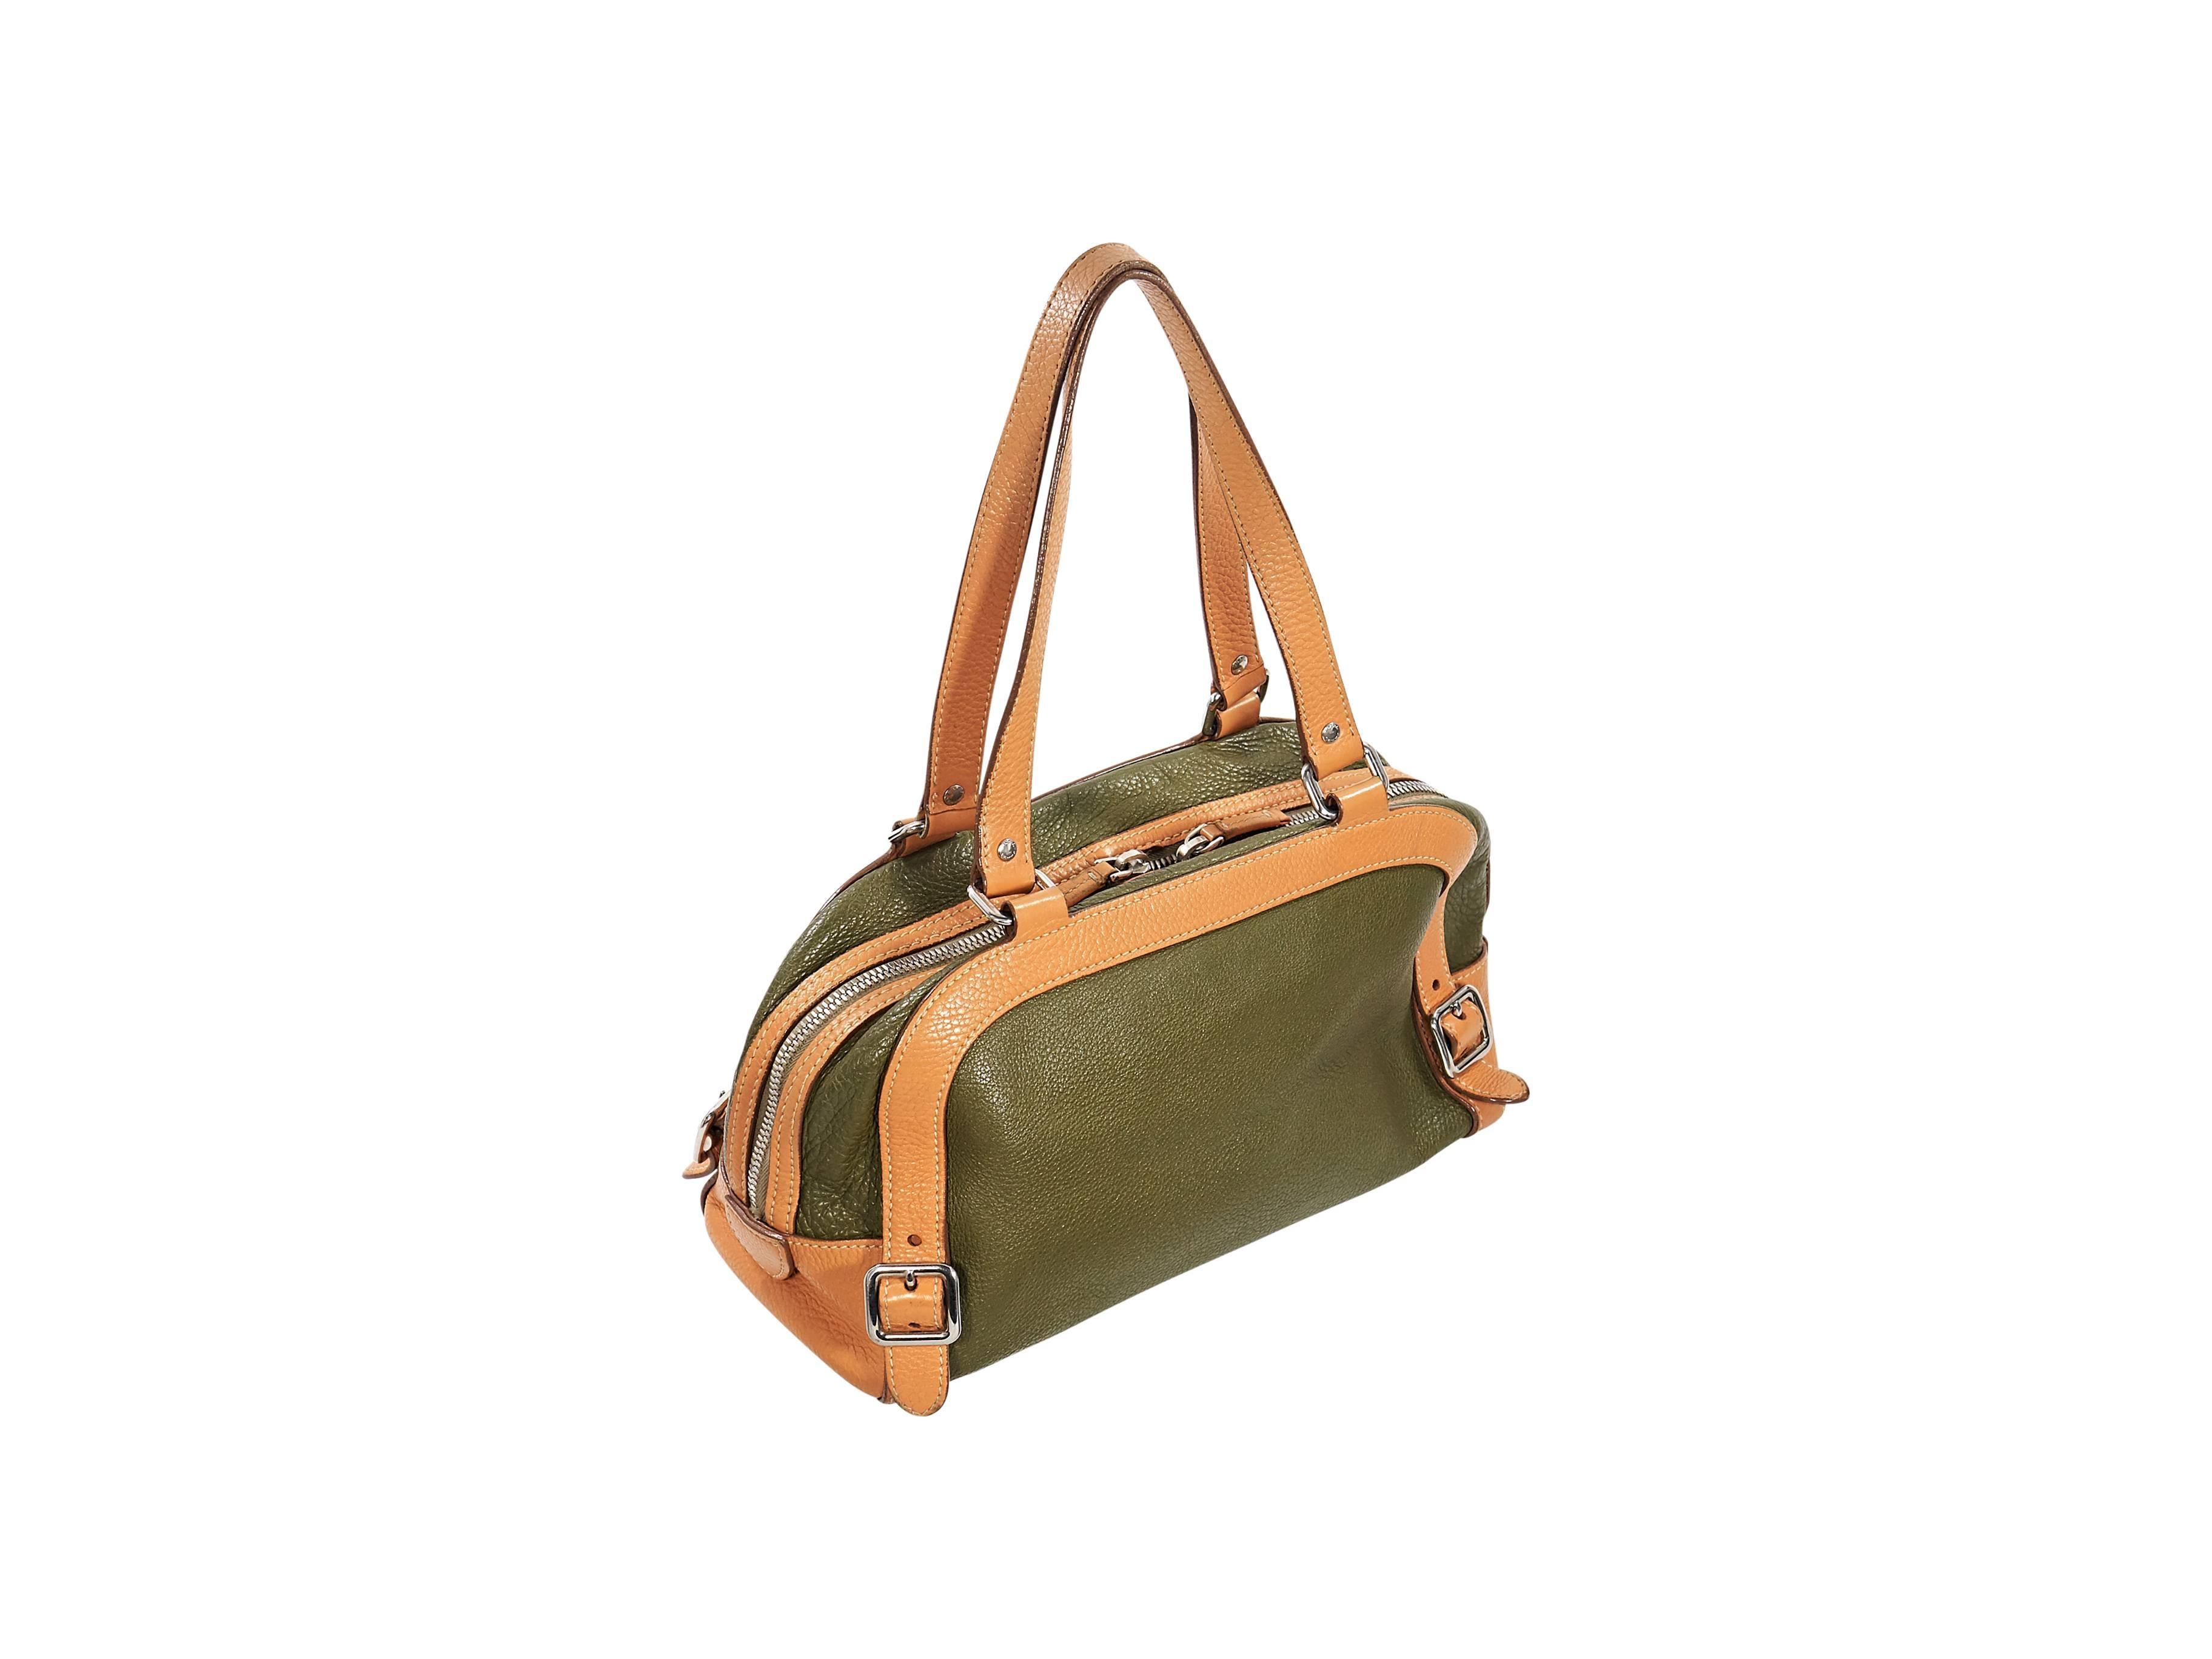 Product details:  Green and tan leather shoulder bag by Prada.  Accented with buckle strap details.  Dual shoulder straps.  Top dual zip closure.  Lined interior with inner zip pockets.  Front exterior zip pocket.  Silvertone hardware.   
Condition: